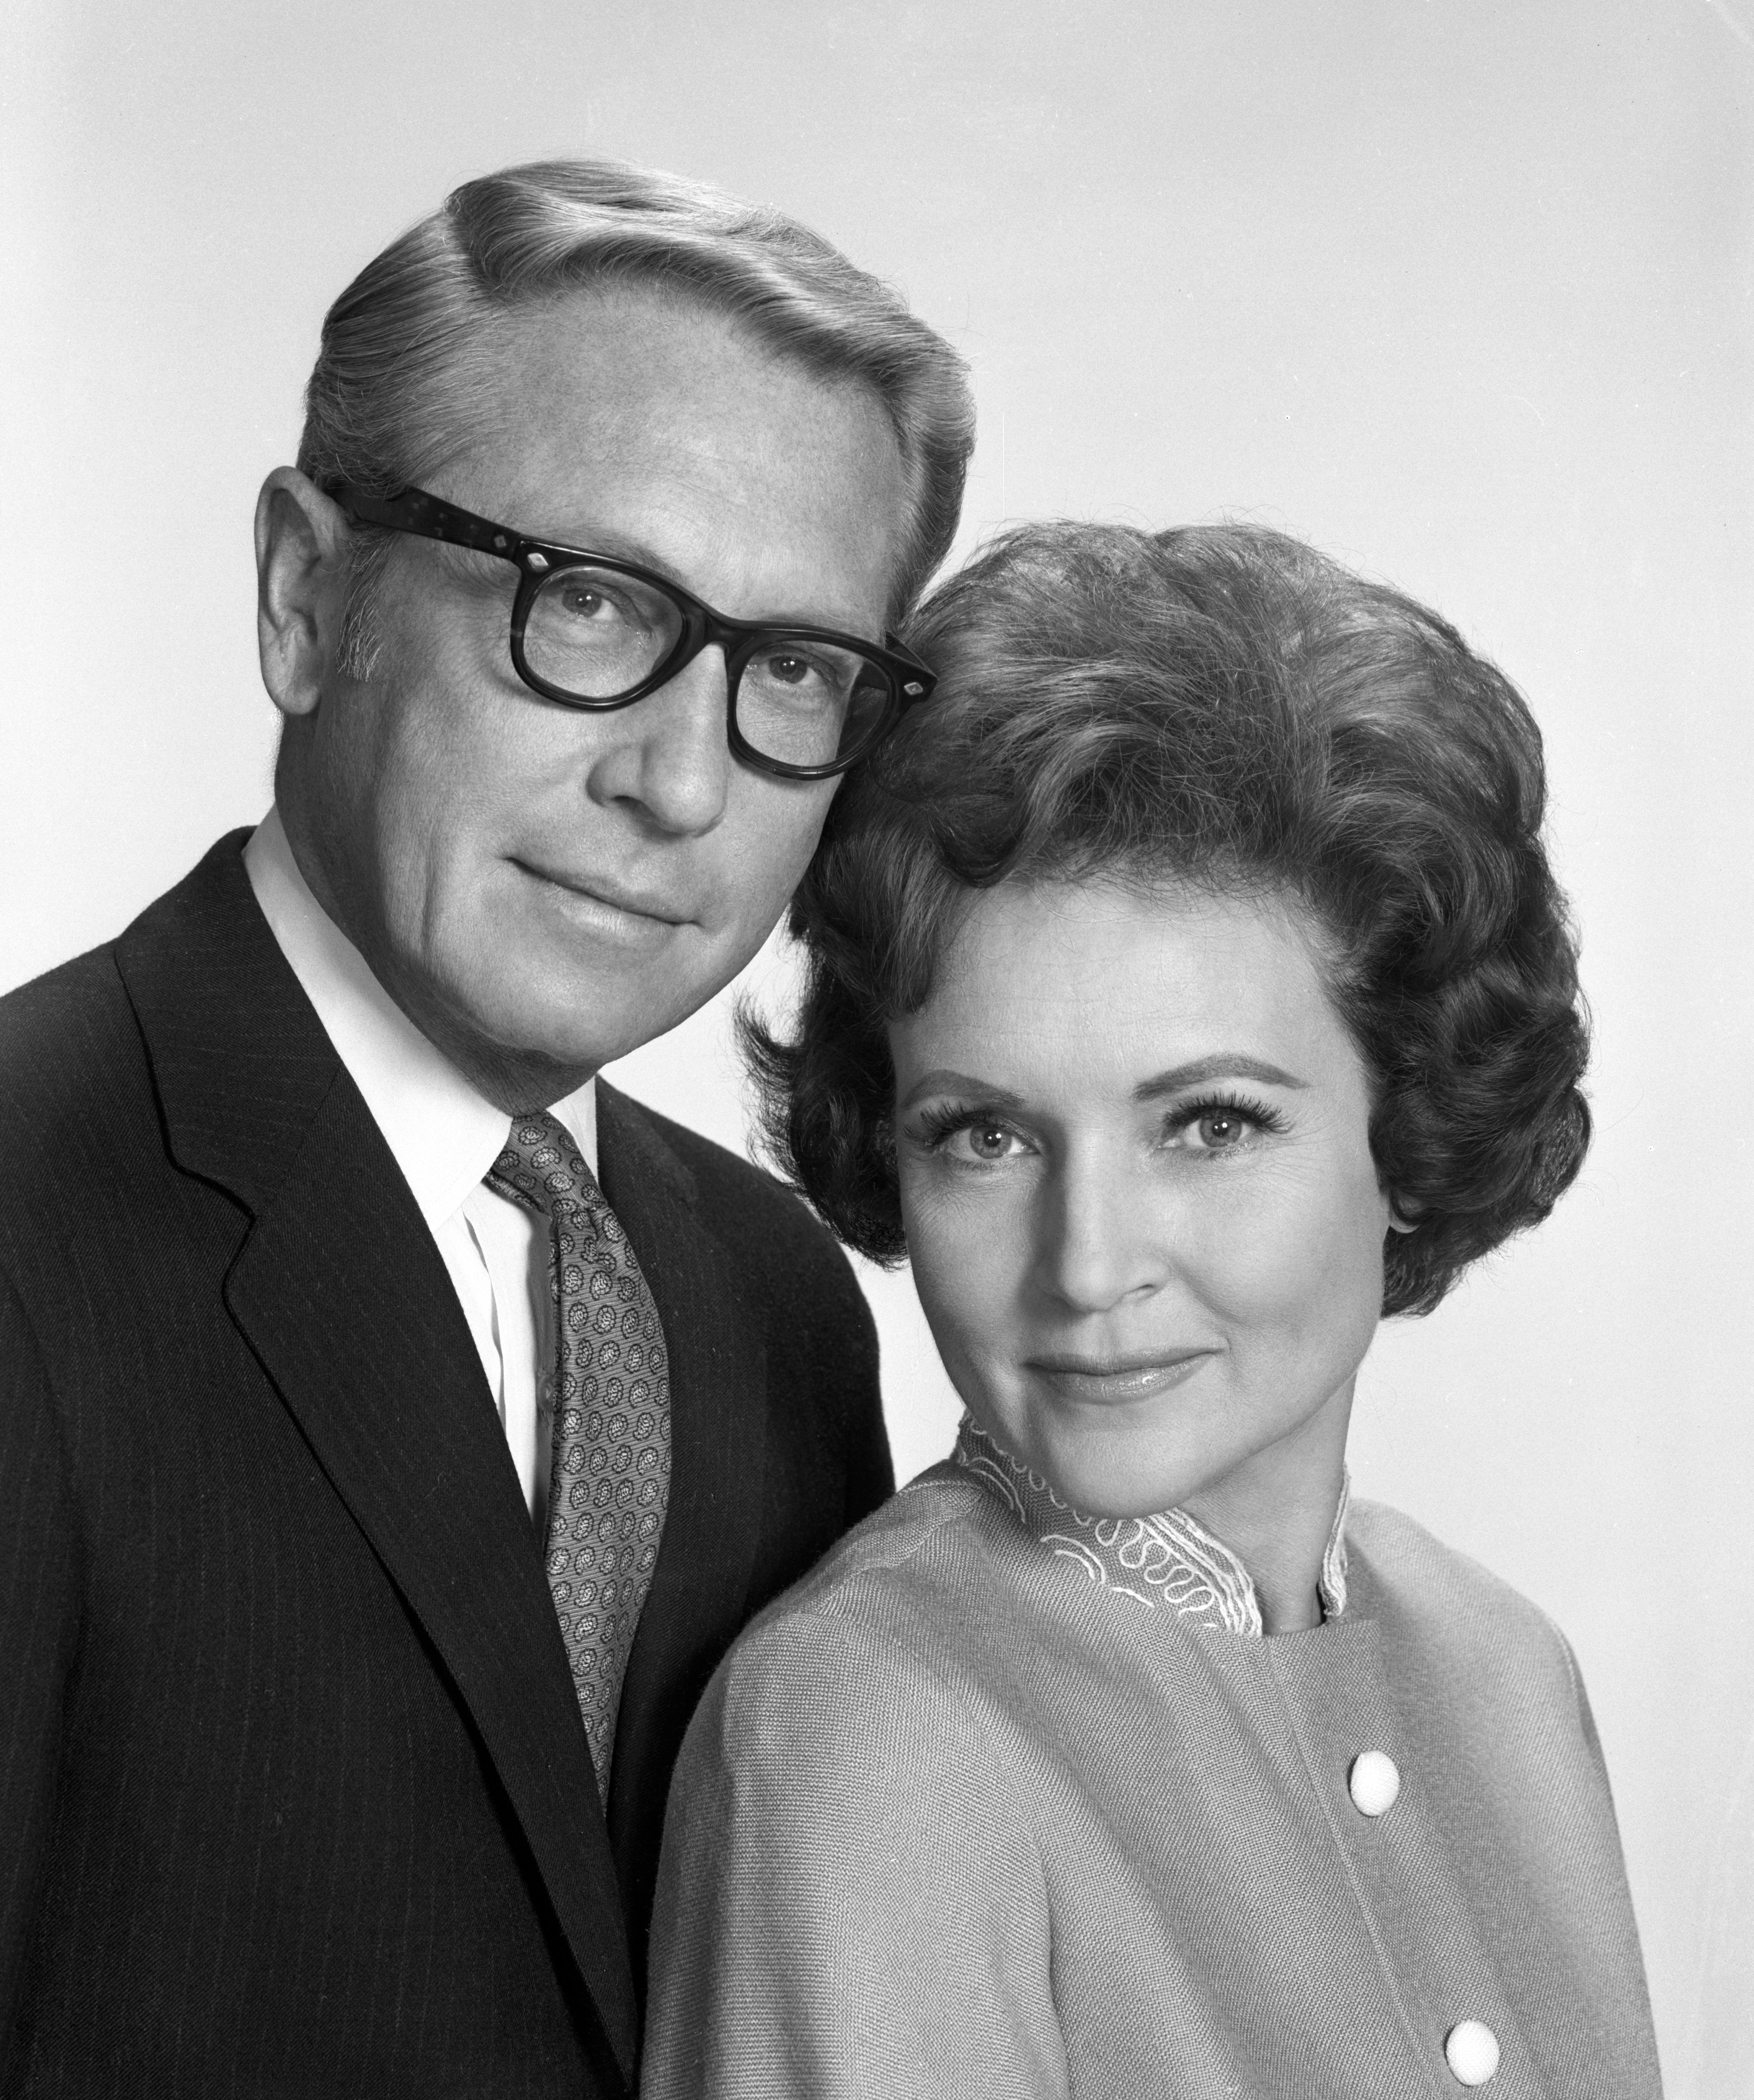 TV show host Allen Ludden and his wife Betty White pictured on December 27, 1968 in New York, New York┃ Source: Getty Images